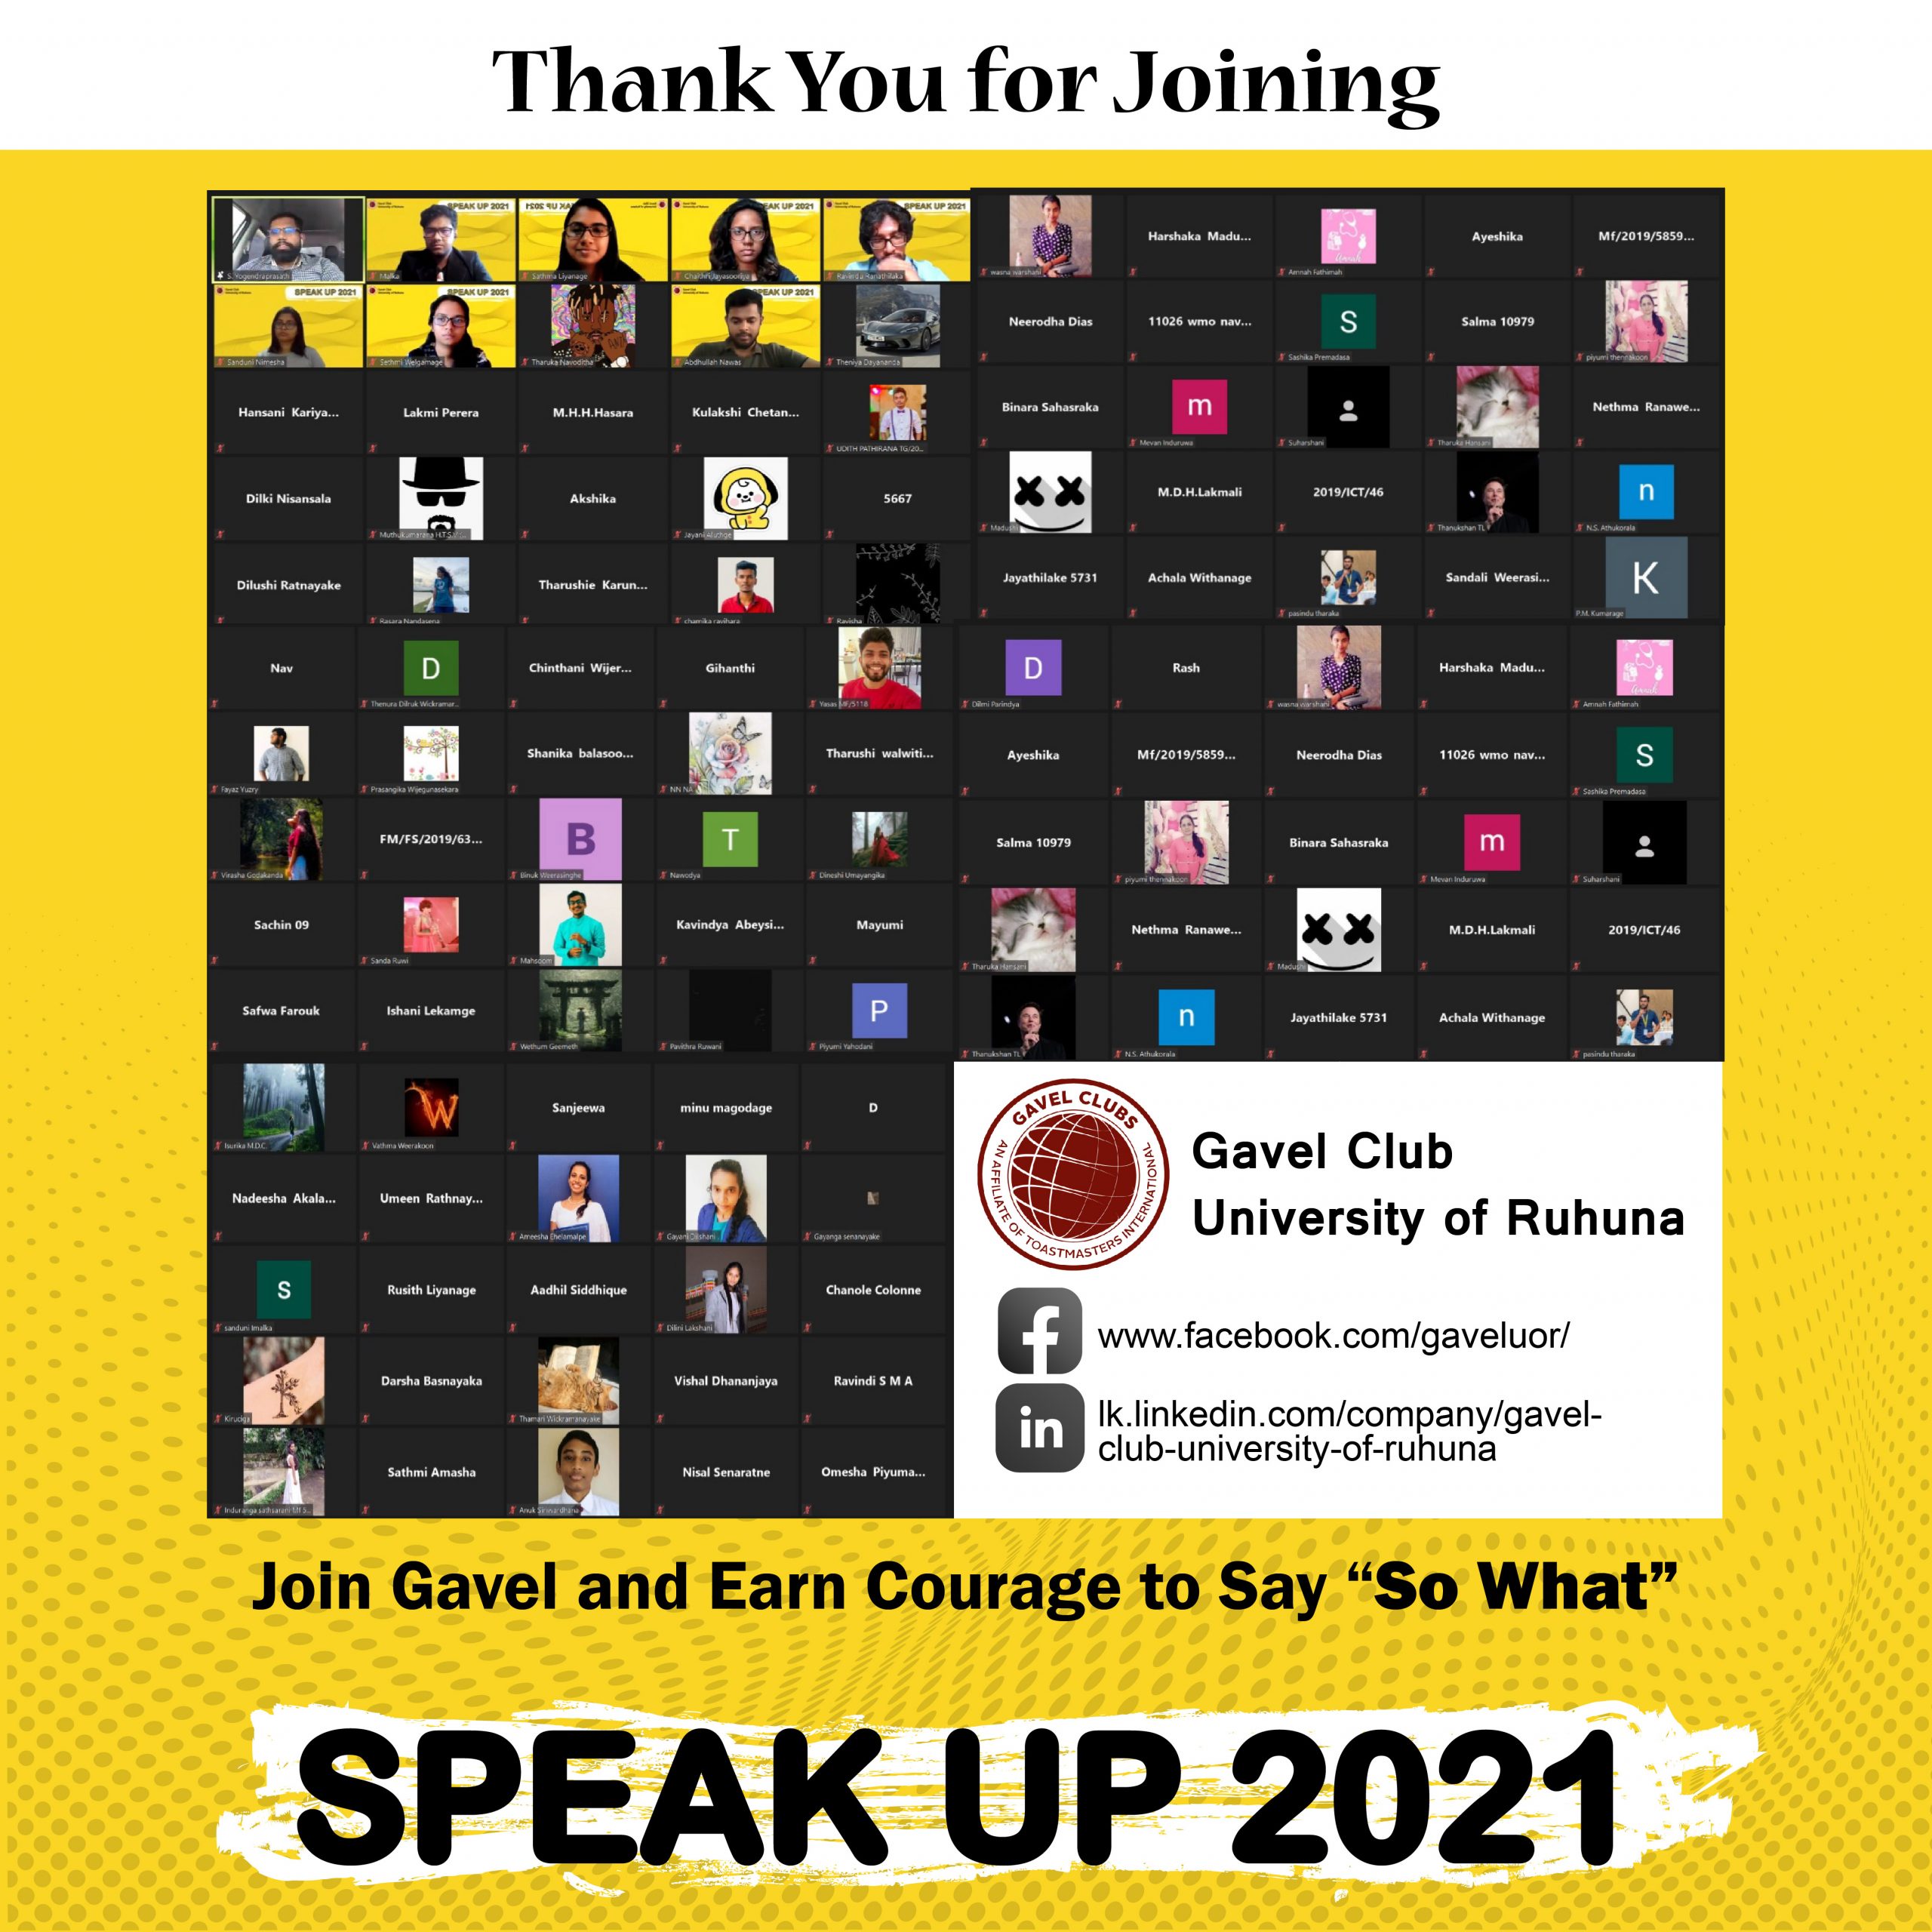 “Don’t care what anyone else might say, just open your mouth and speak up!” – Speak-Up 2021